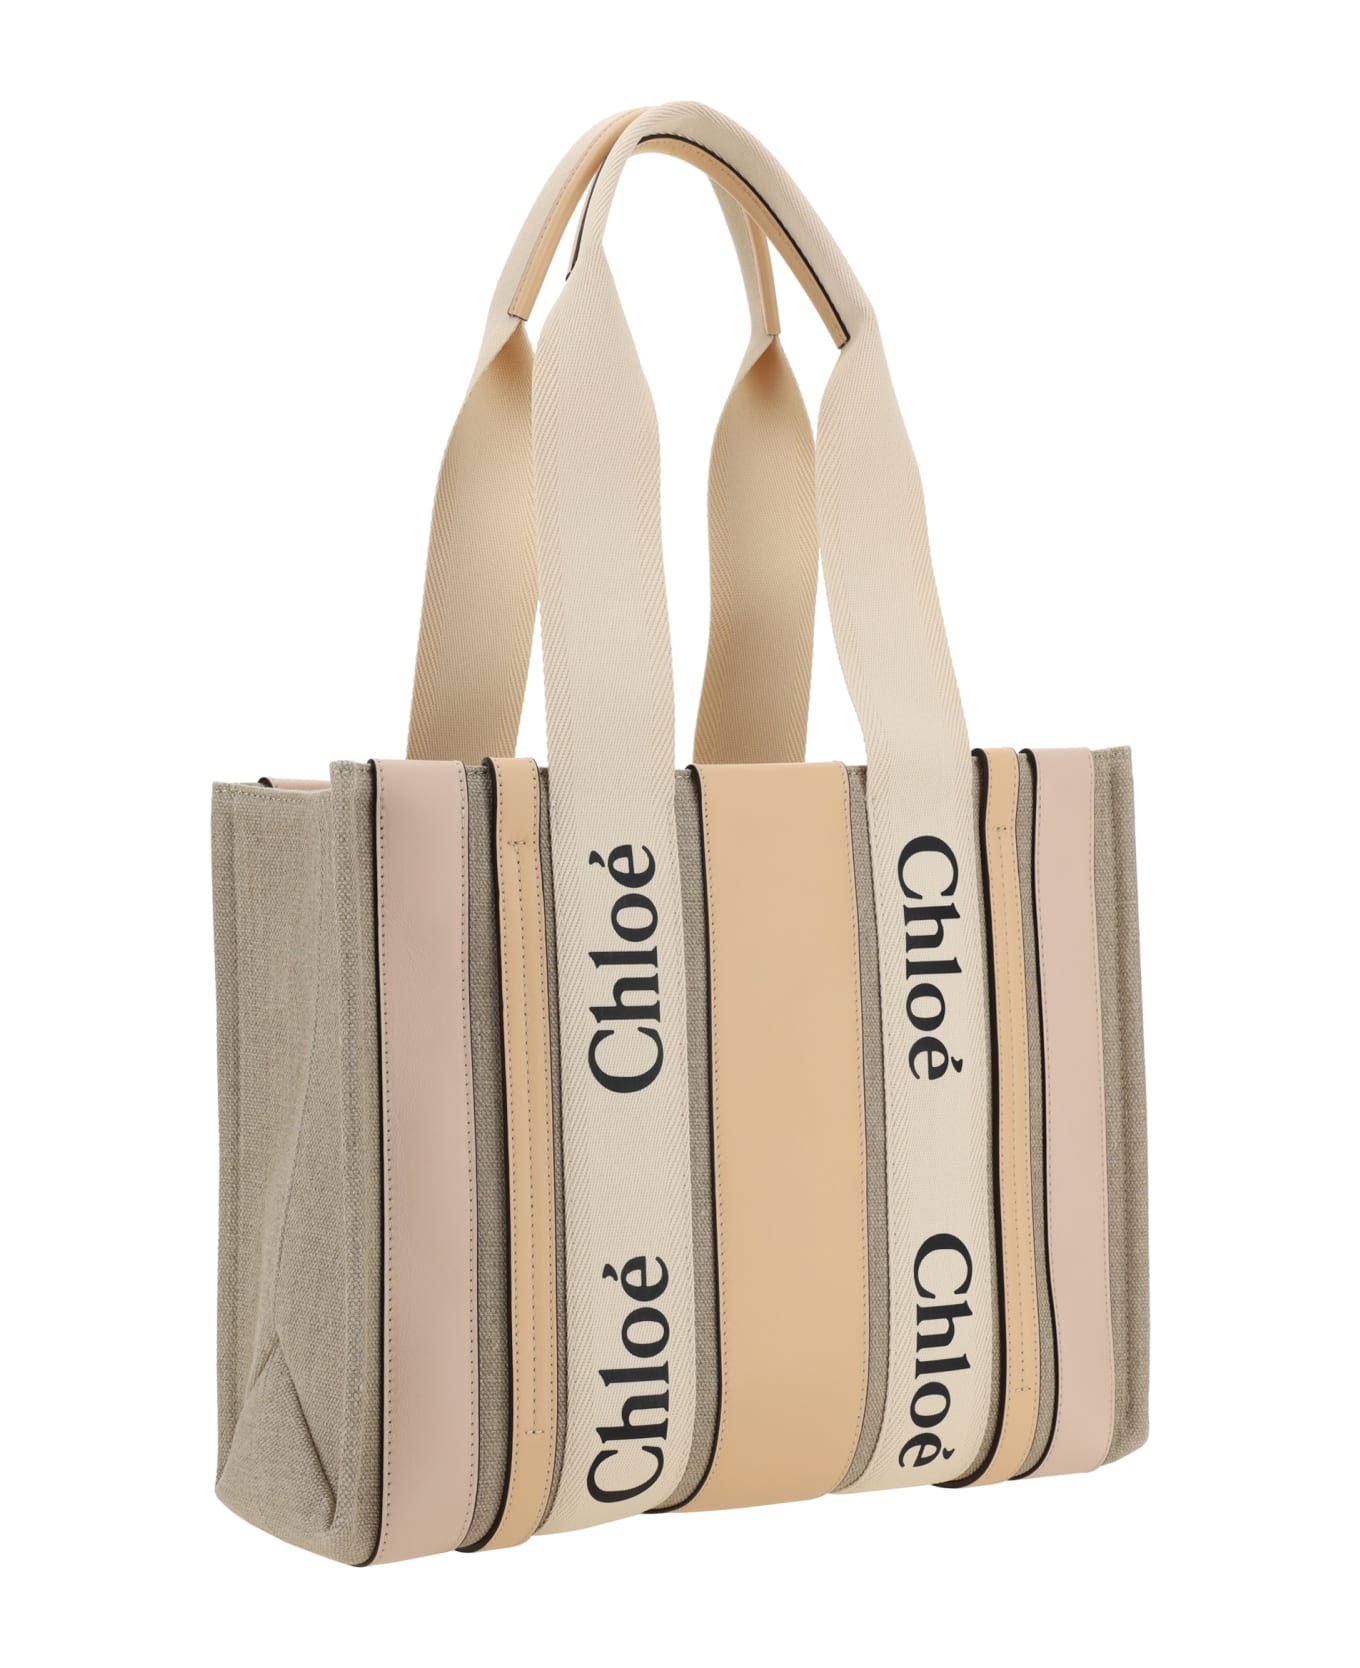 Chloé Woody Medium Tote Bag - Cement Pink トートバッグ